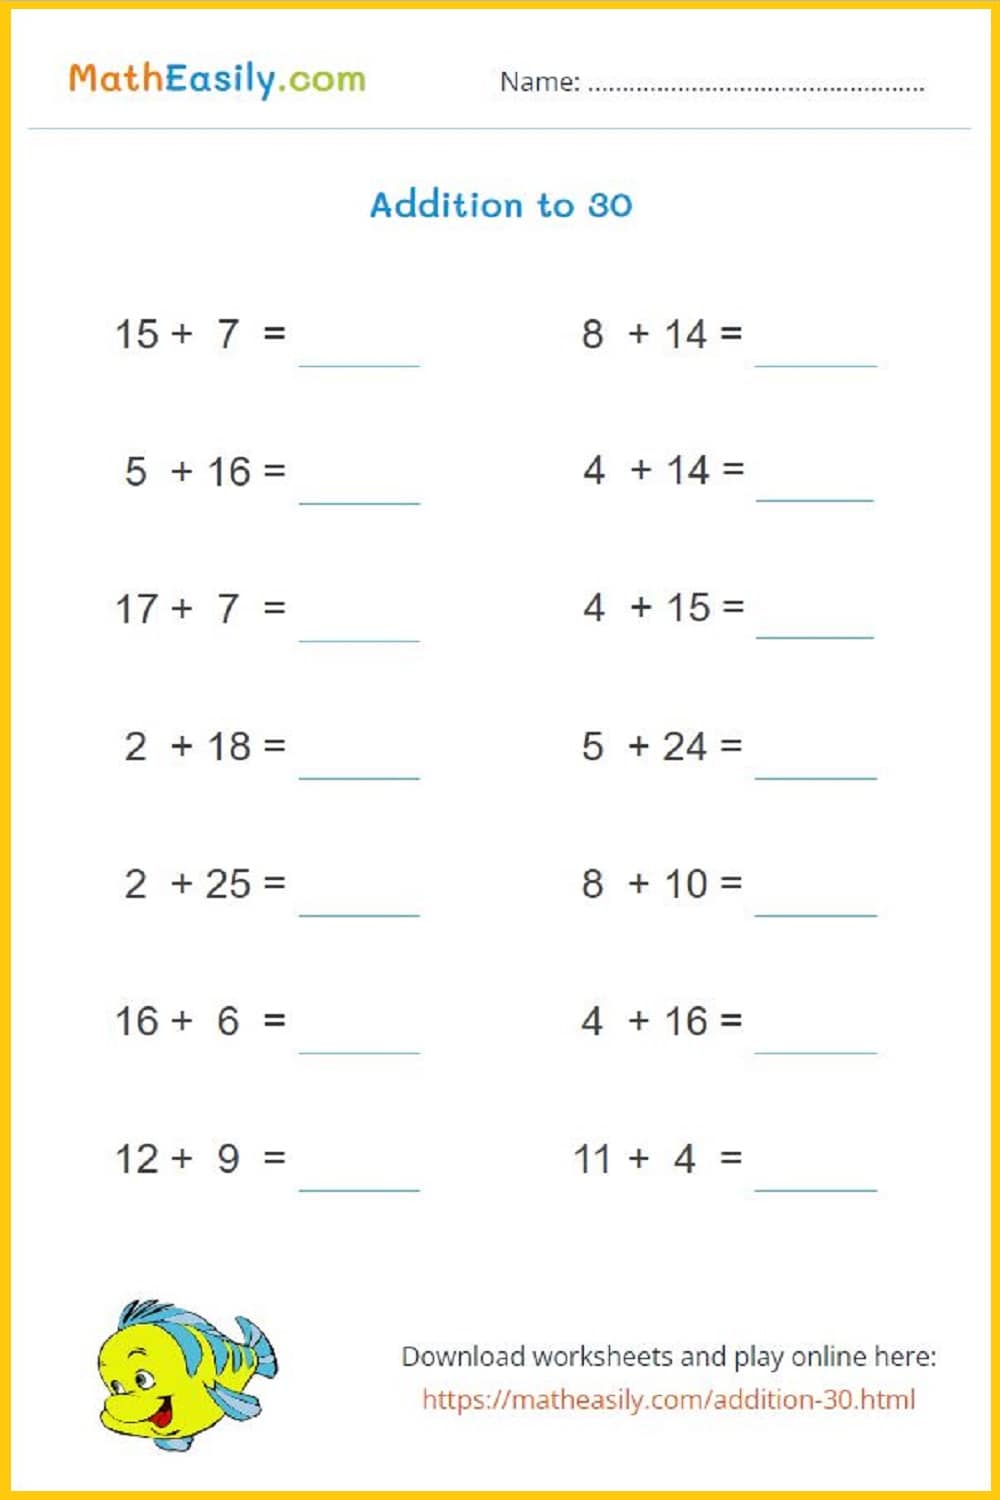 addition to 30 worksheets PDF. addition to 30 game. 
addition up to 30 worksheets free. 1 to 30 addition sums. math addition worksheets up to 30